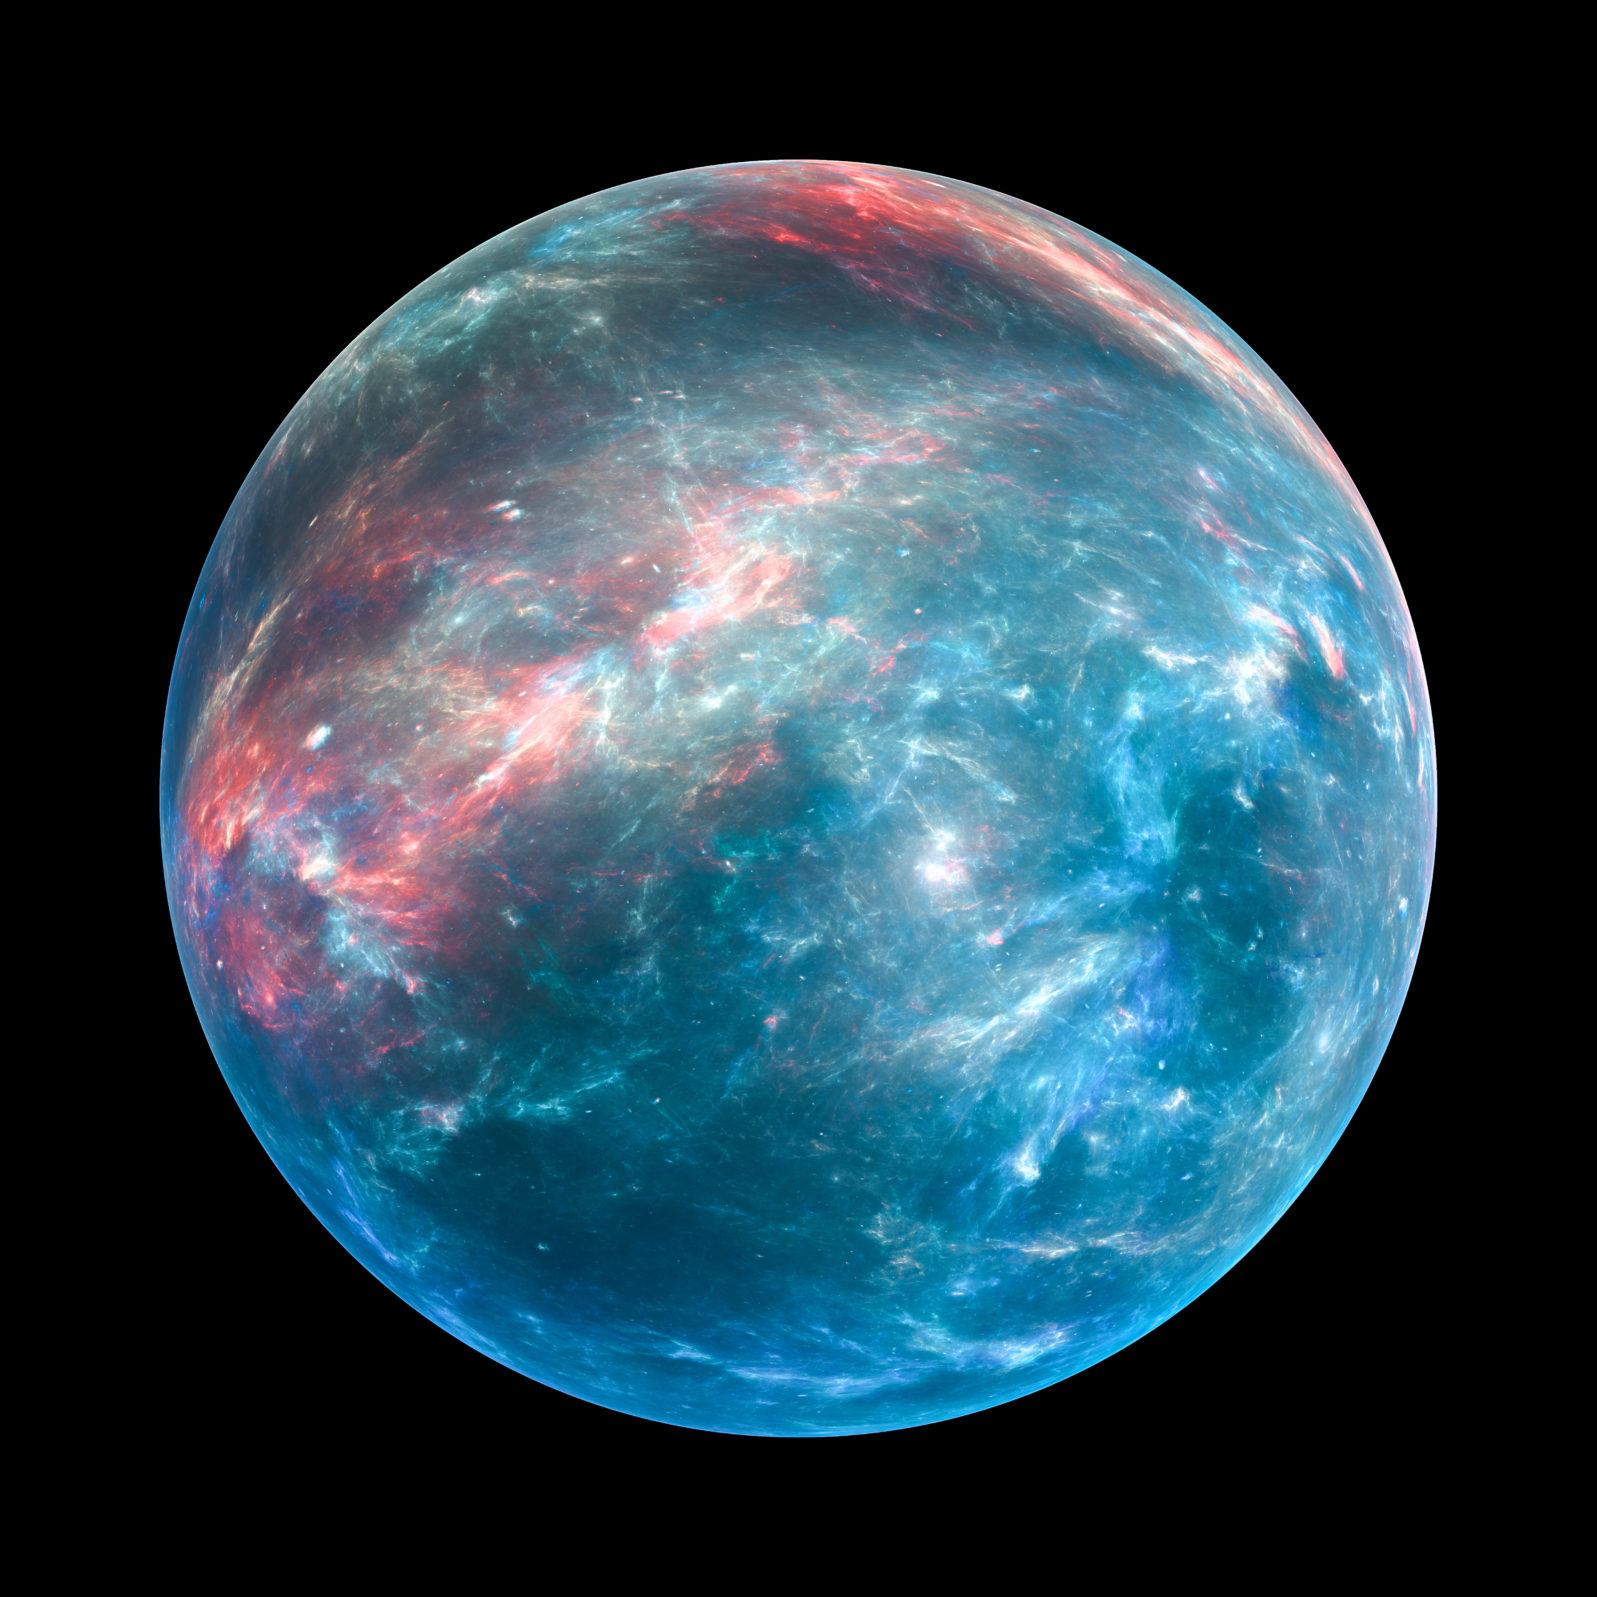 Colorful exoplanet insolated on black